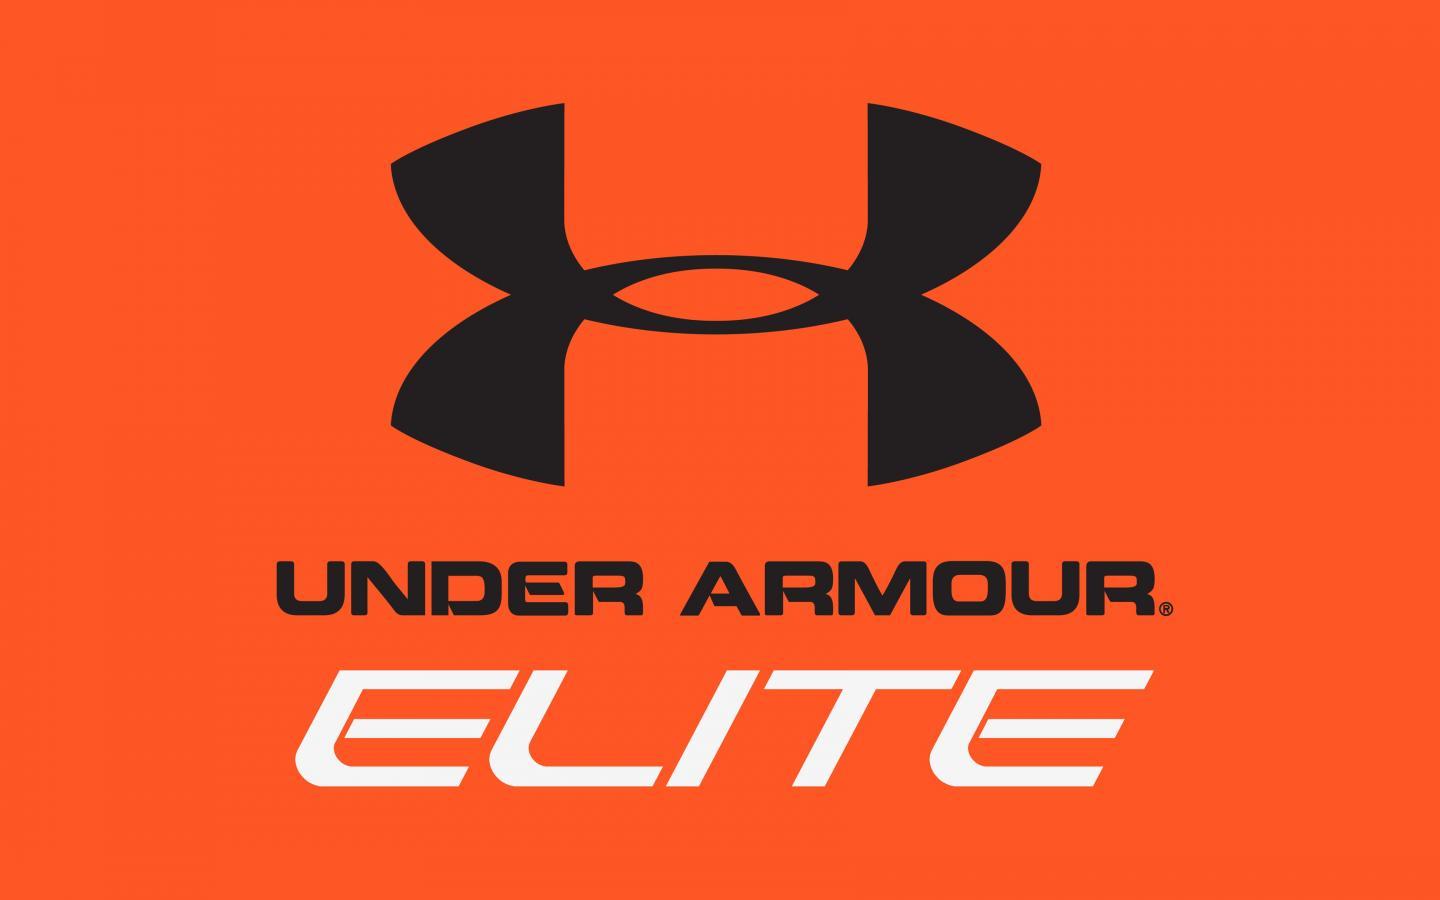 Cool Under Armour Wallpapers - Top Free Cool Under Armour Backgrounds ...